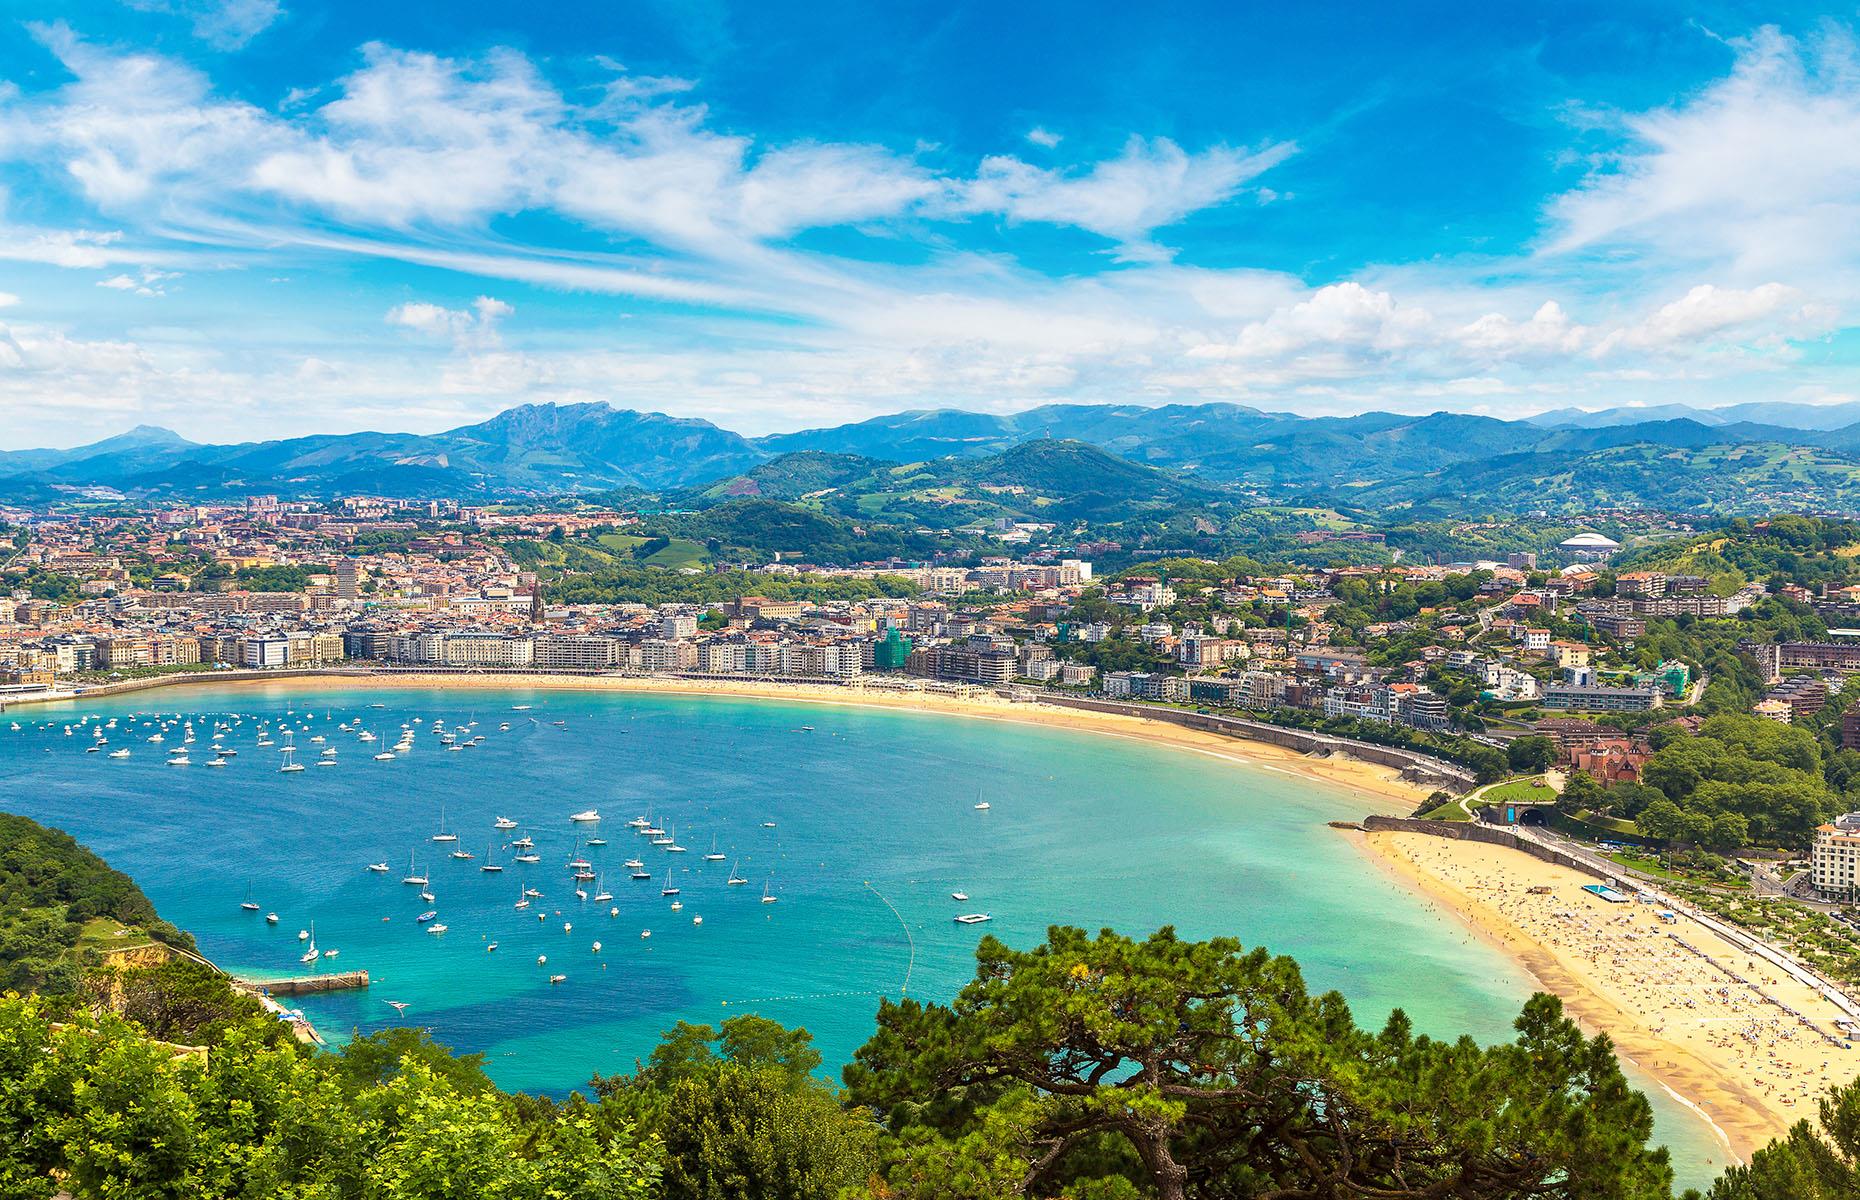 The celebrated 298-mile (480km) Basque Circuit winds its way through the rugged landscapes of northern Spain and southwest France. from Bilbao to Pamplona and up into the Pyrenees, before plunging back down towards Biarritz and tracing the Bay of Biscay, taking in the many splendours of San Sebastián (pictured) along the way.